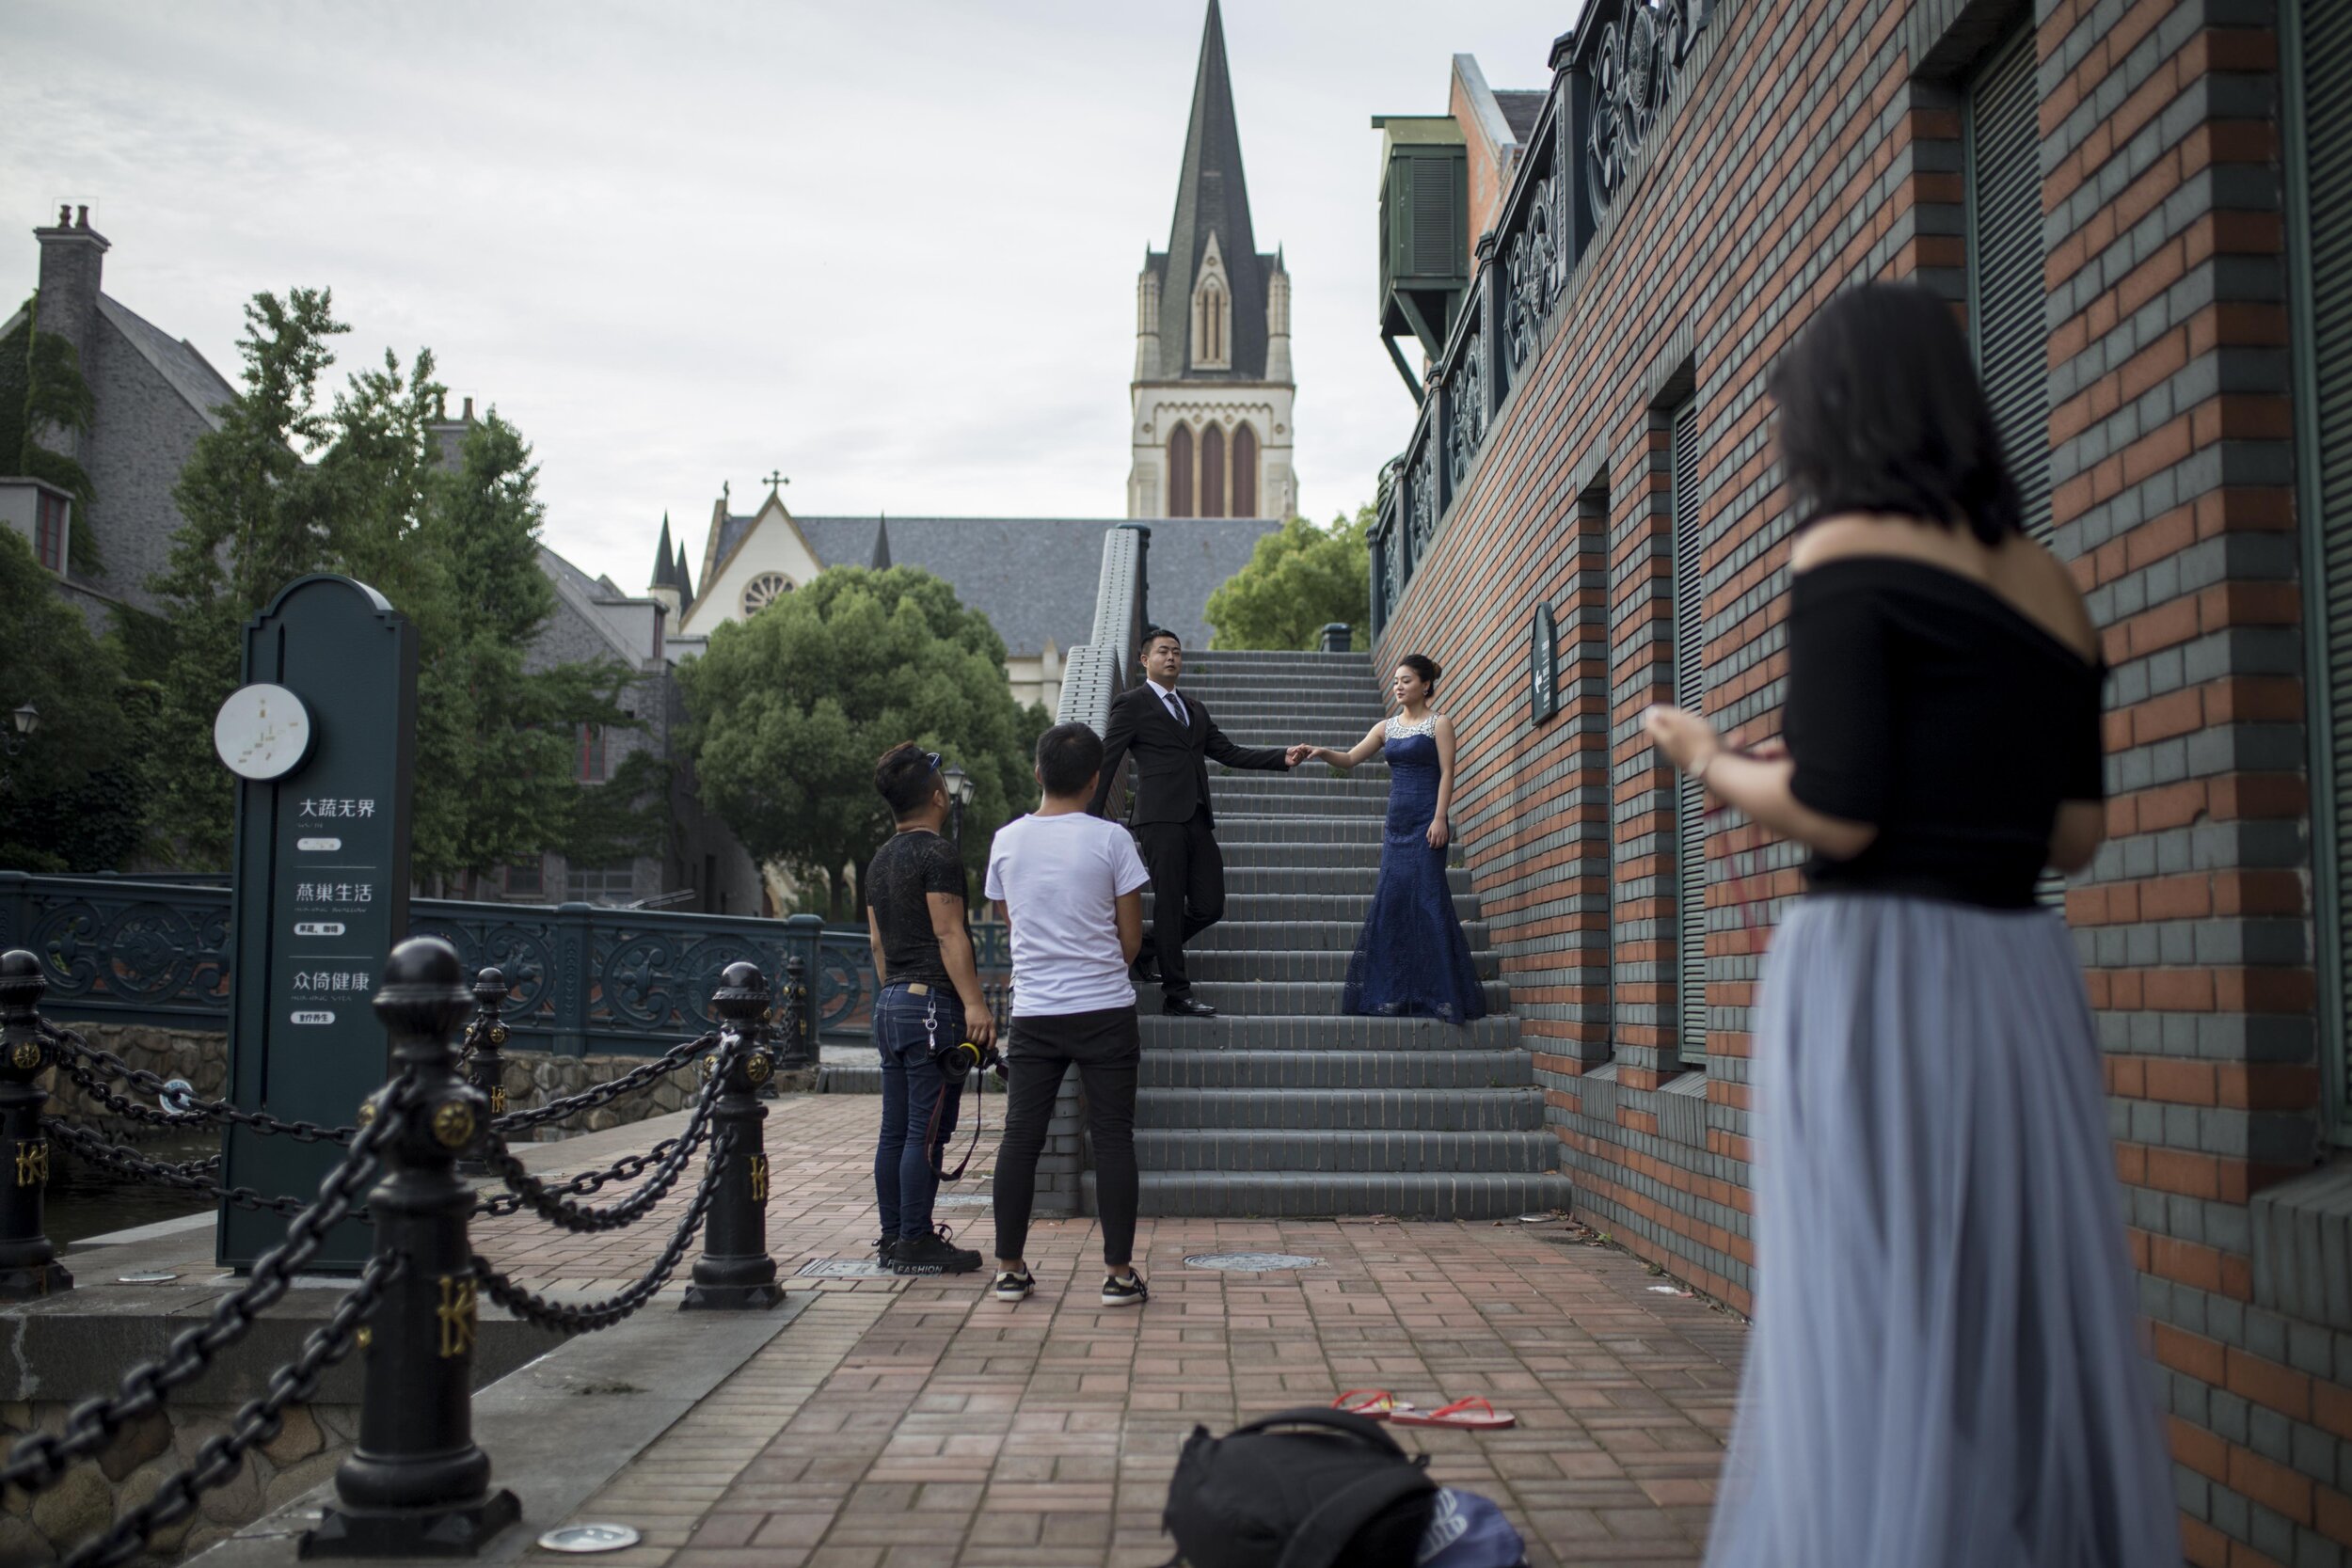  A newly wed couple poses for a photo in Thames Town, a replica of an English city near Shanghai. The wedding photography business has taken off in recent years.  